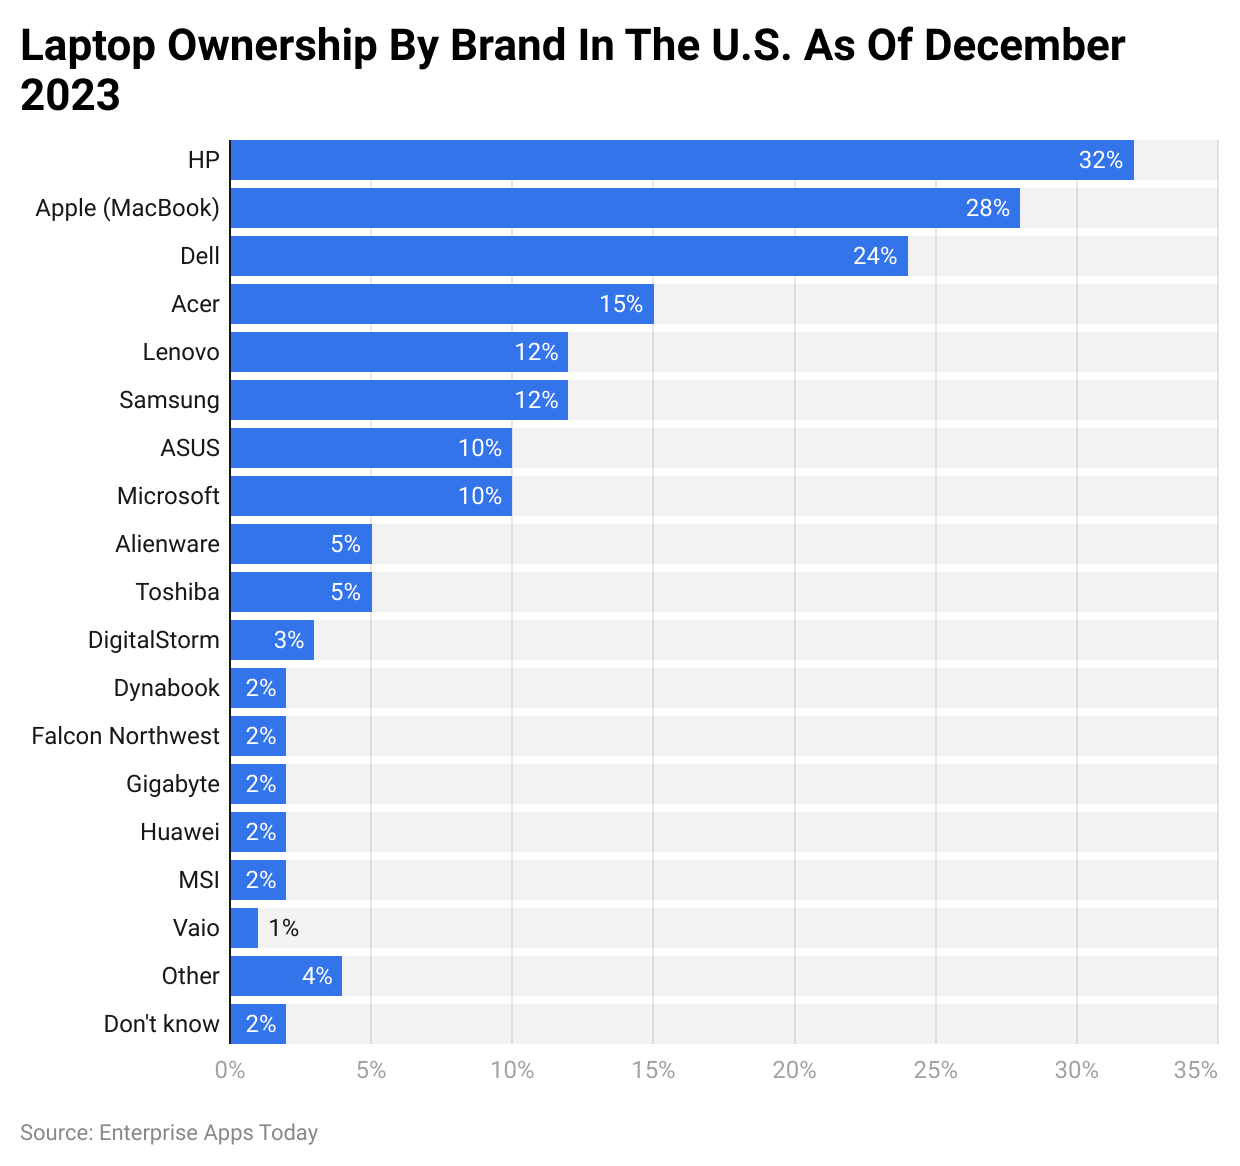 Laptop ownership by brand in the U.S. as of December 2023